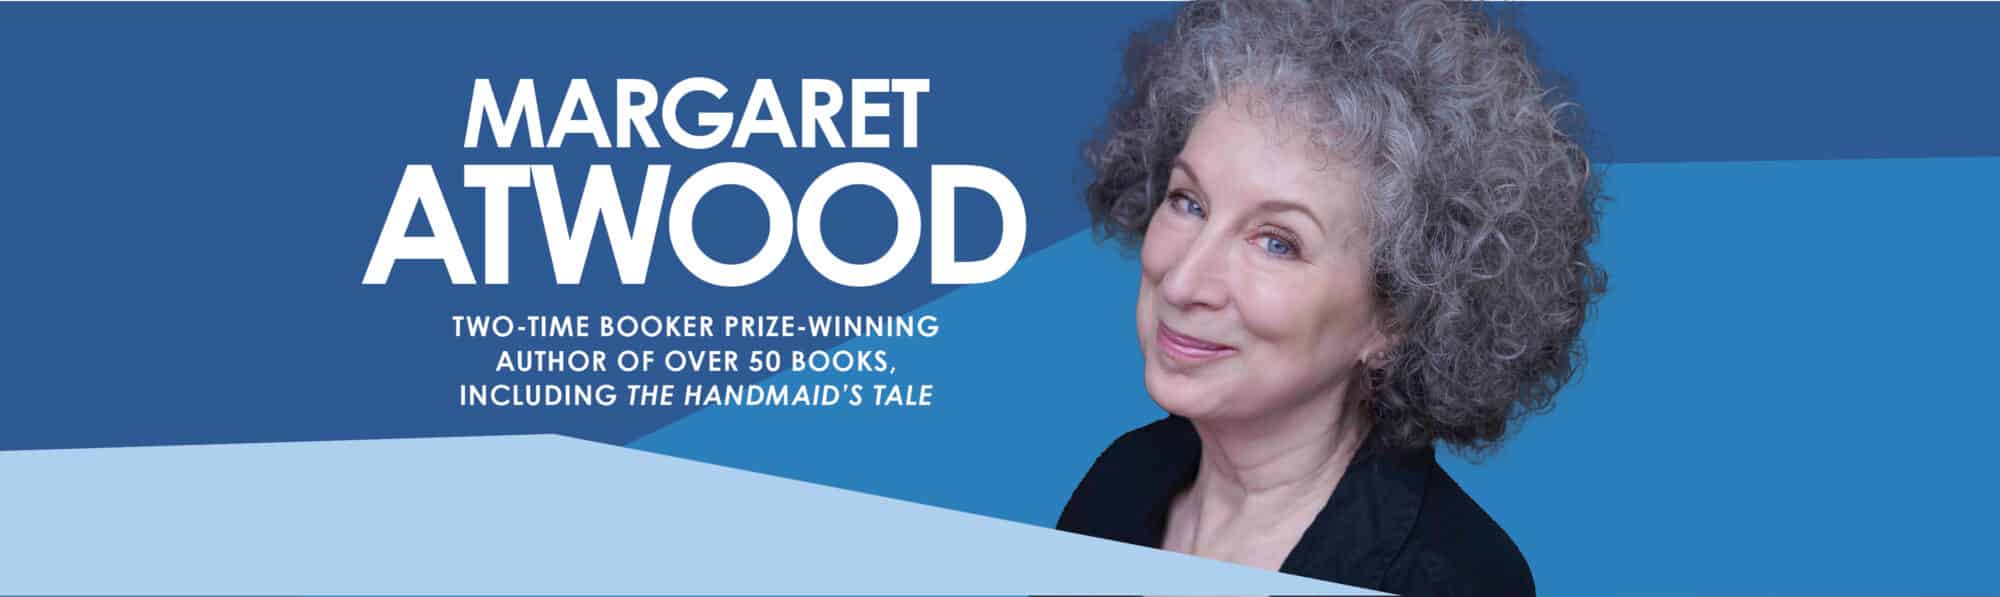 Join Margaret Atwood at the MA Conference for Women on December 14th!